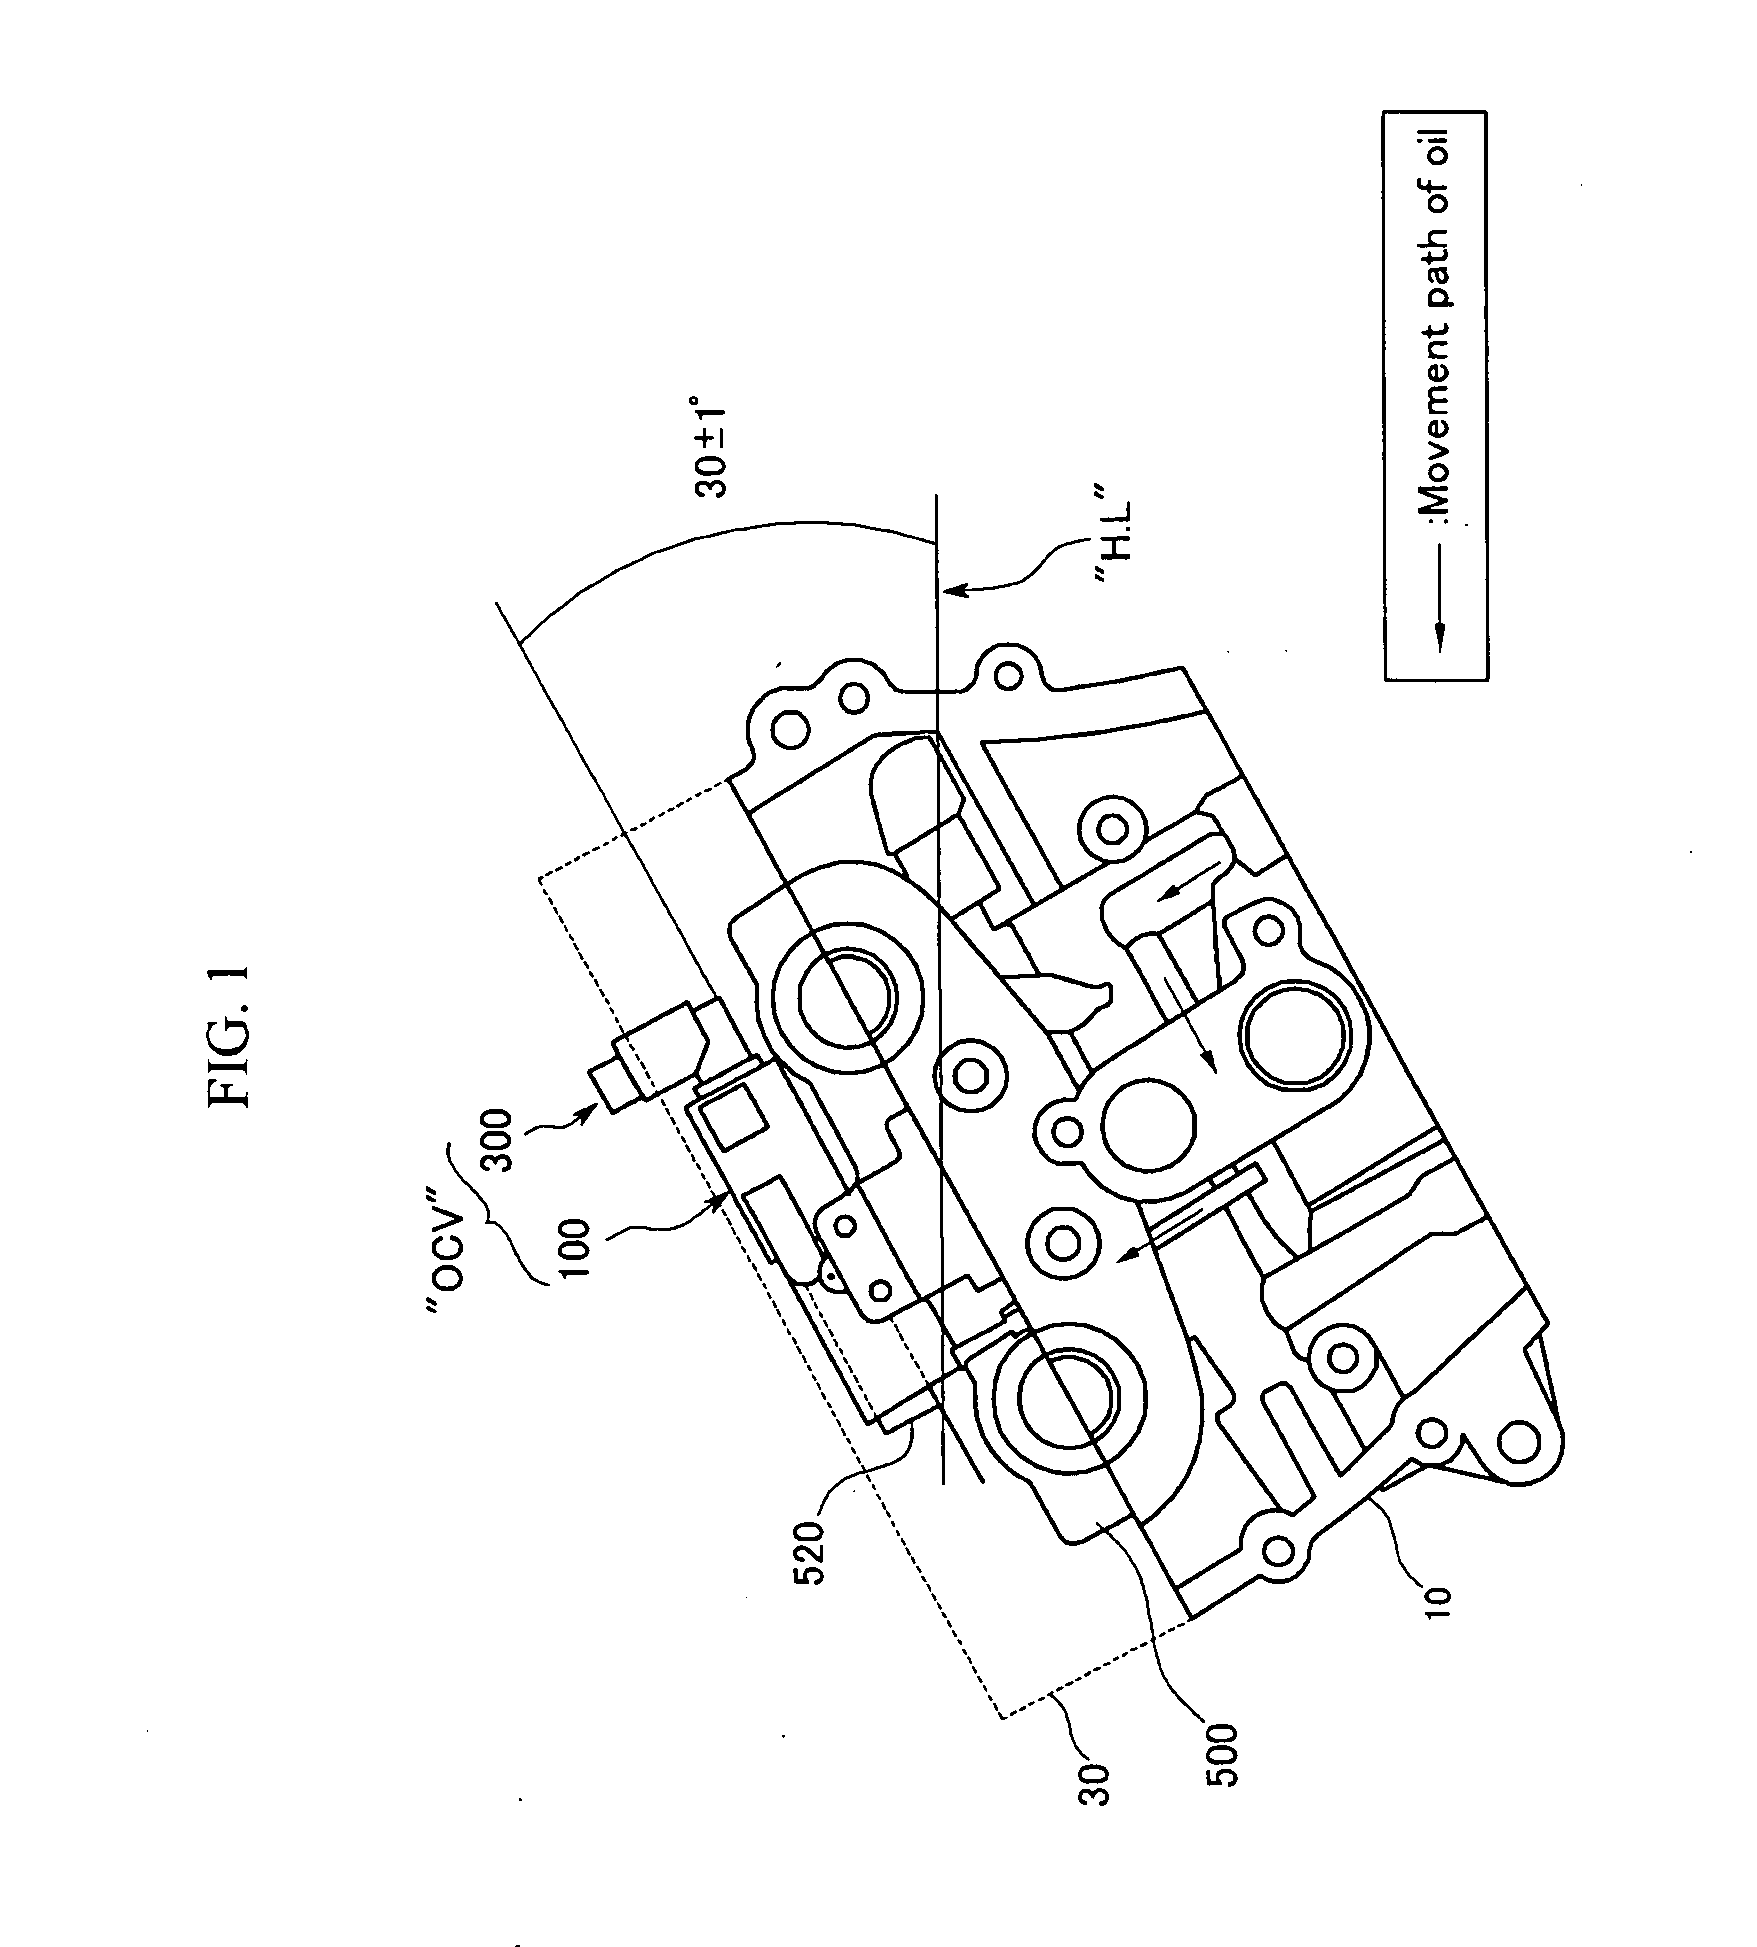 Oil control valve of a vehicle engine